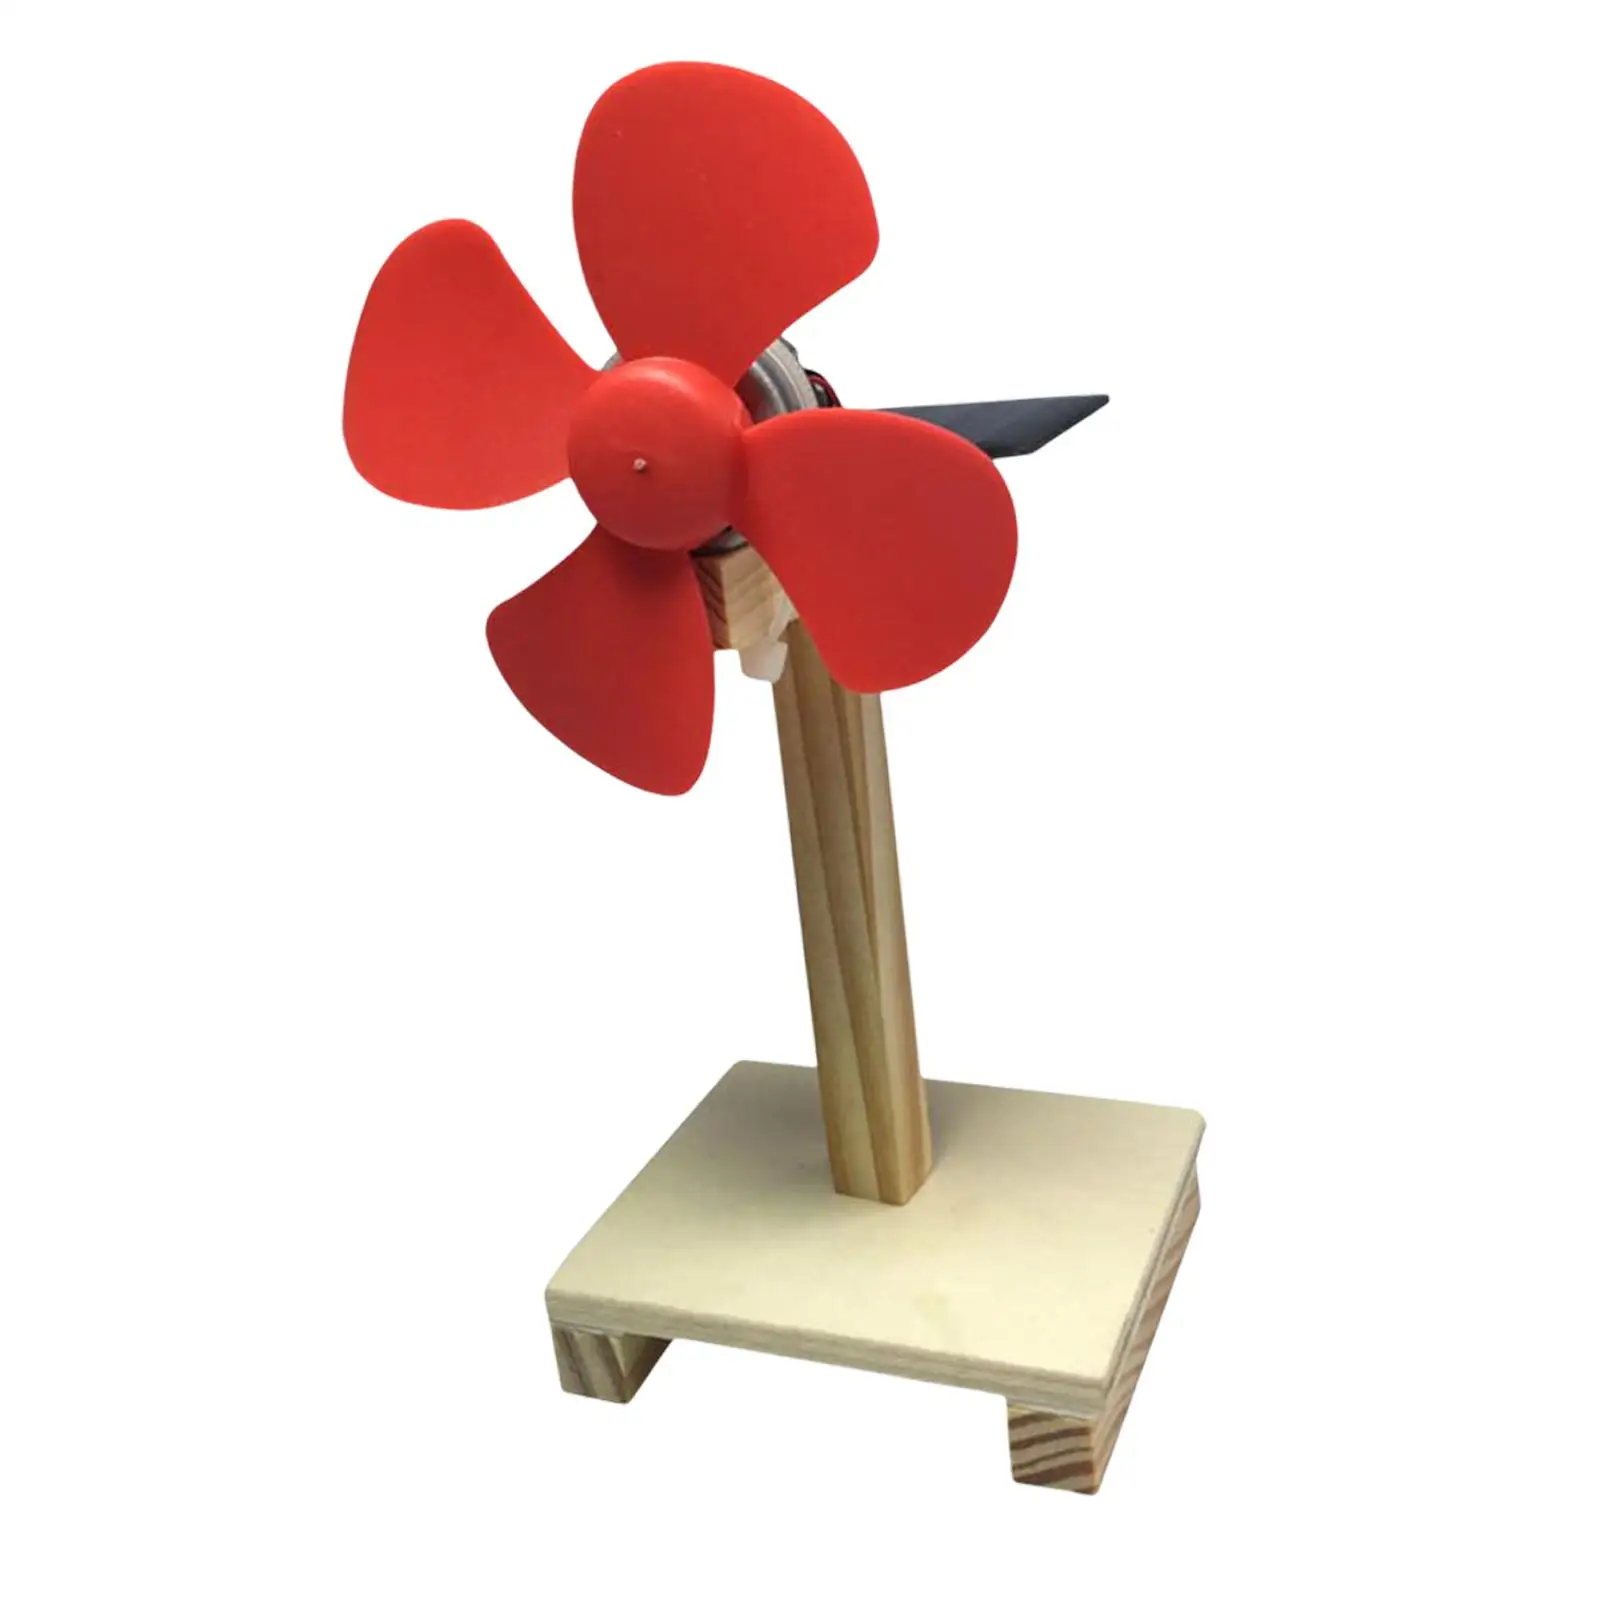 

Wooden Building Kits Novelty Wooden Solar Fan Stem Kits science Study Interaction Gift Exploring The Principle Teaching Prop